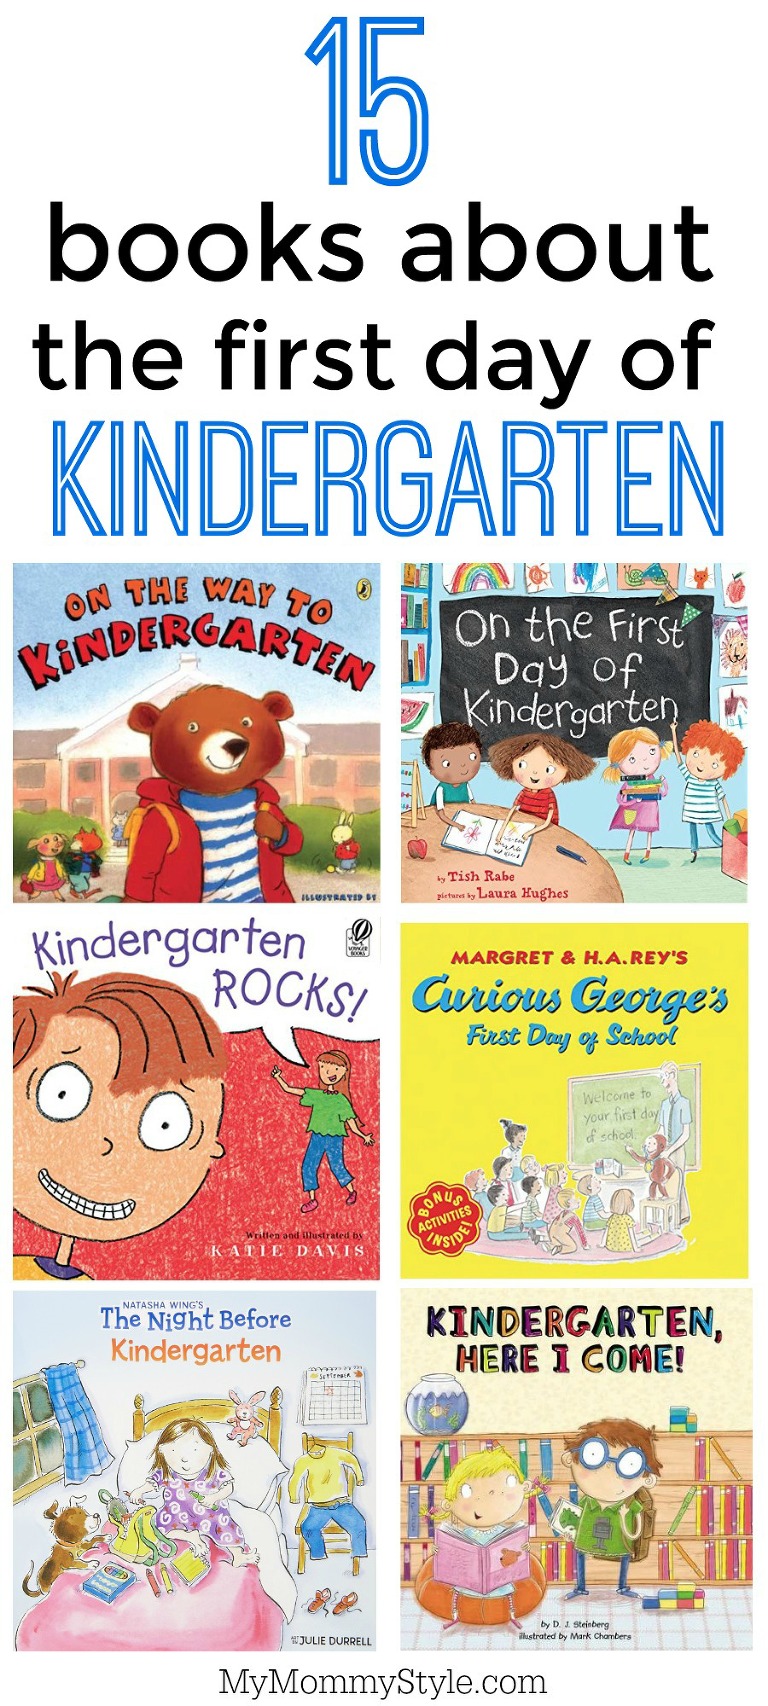 15 books about the first day of kindergarten